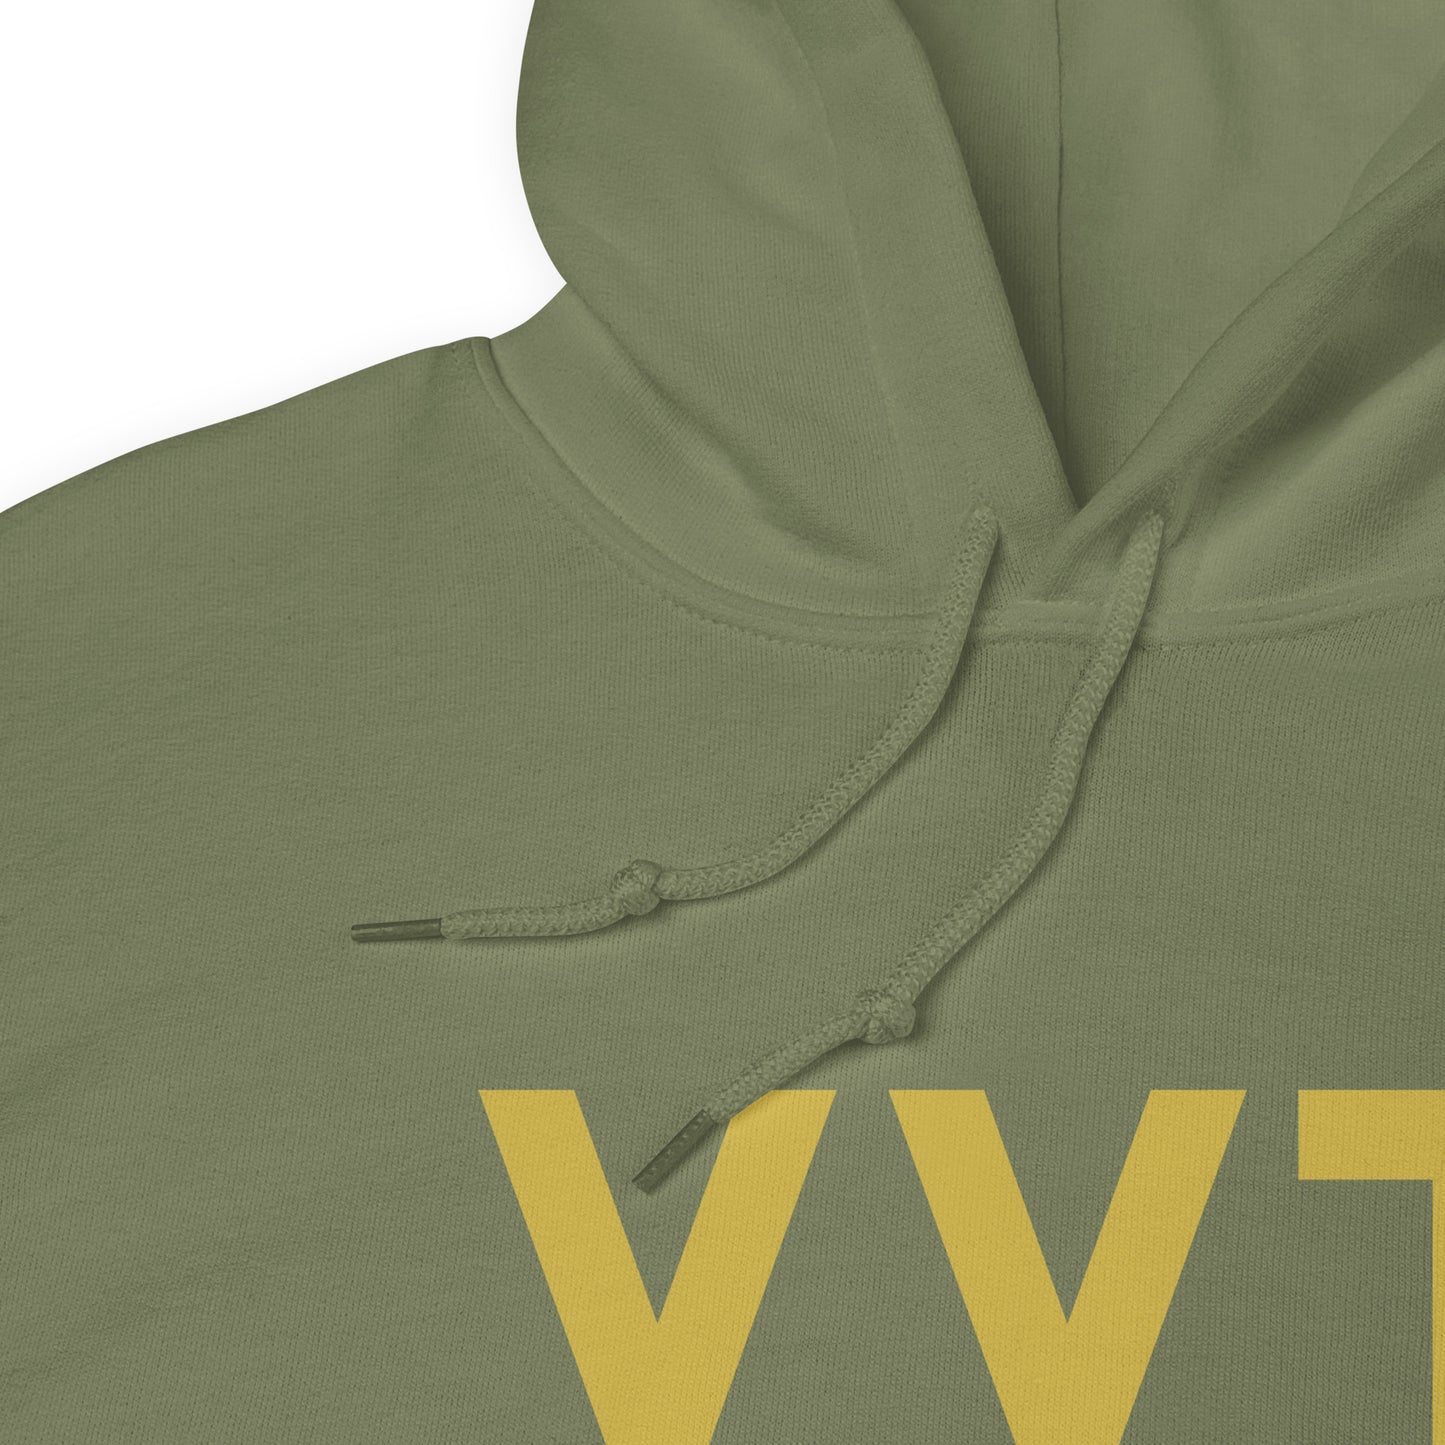 Aviation Gift Unisex Hoodie - Old Gold Graphic • YYT St. John's • YHM Designs - Image 08